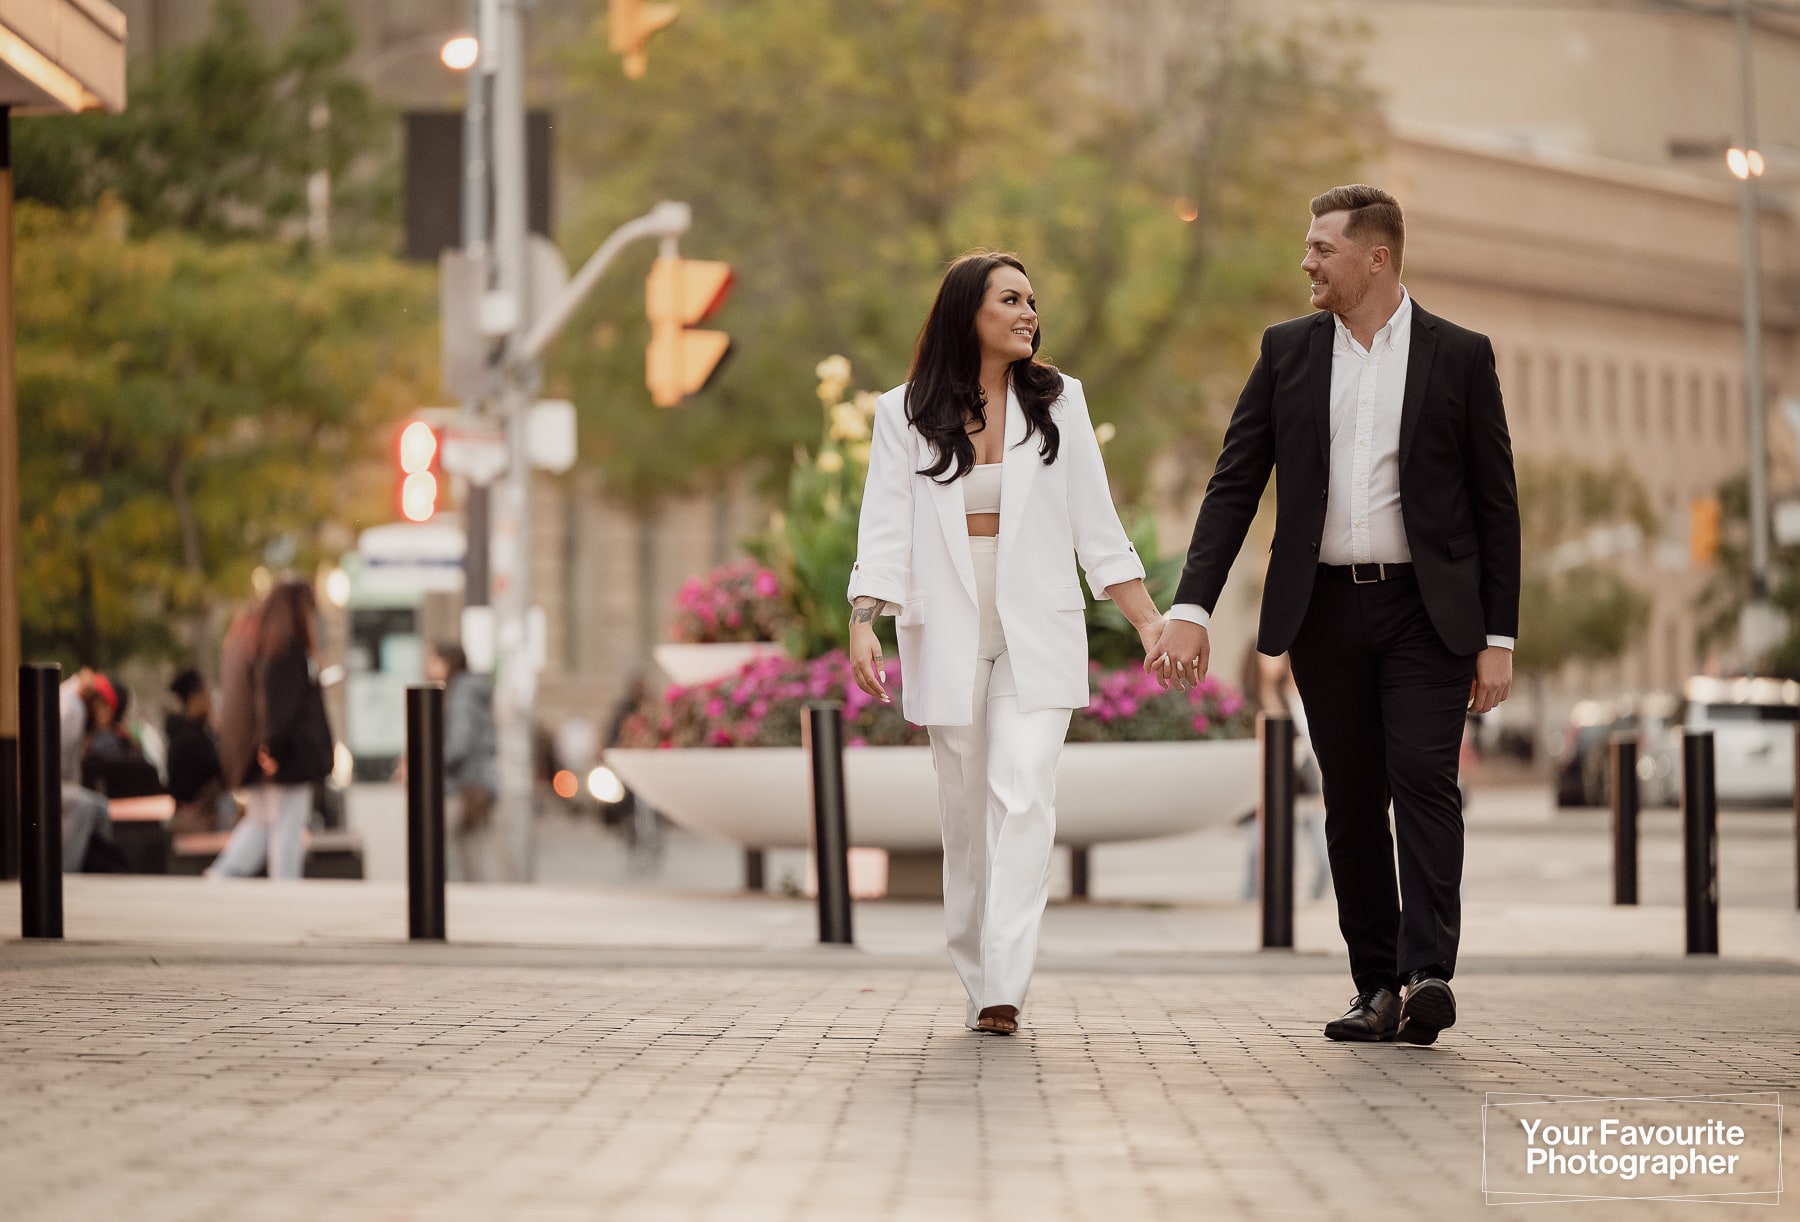 Rob and Sam's engagement photo shoot on the streets of downtown Toronto near Union Station